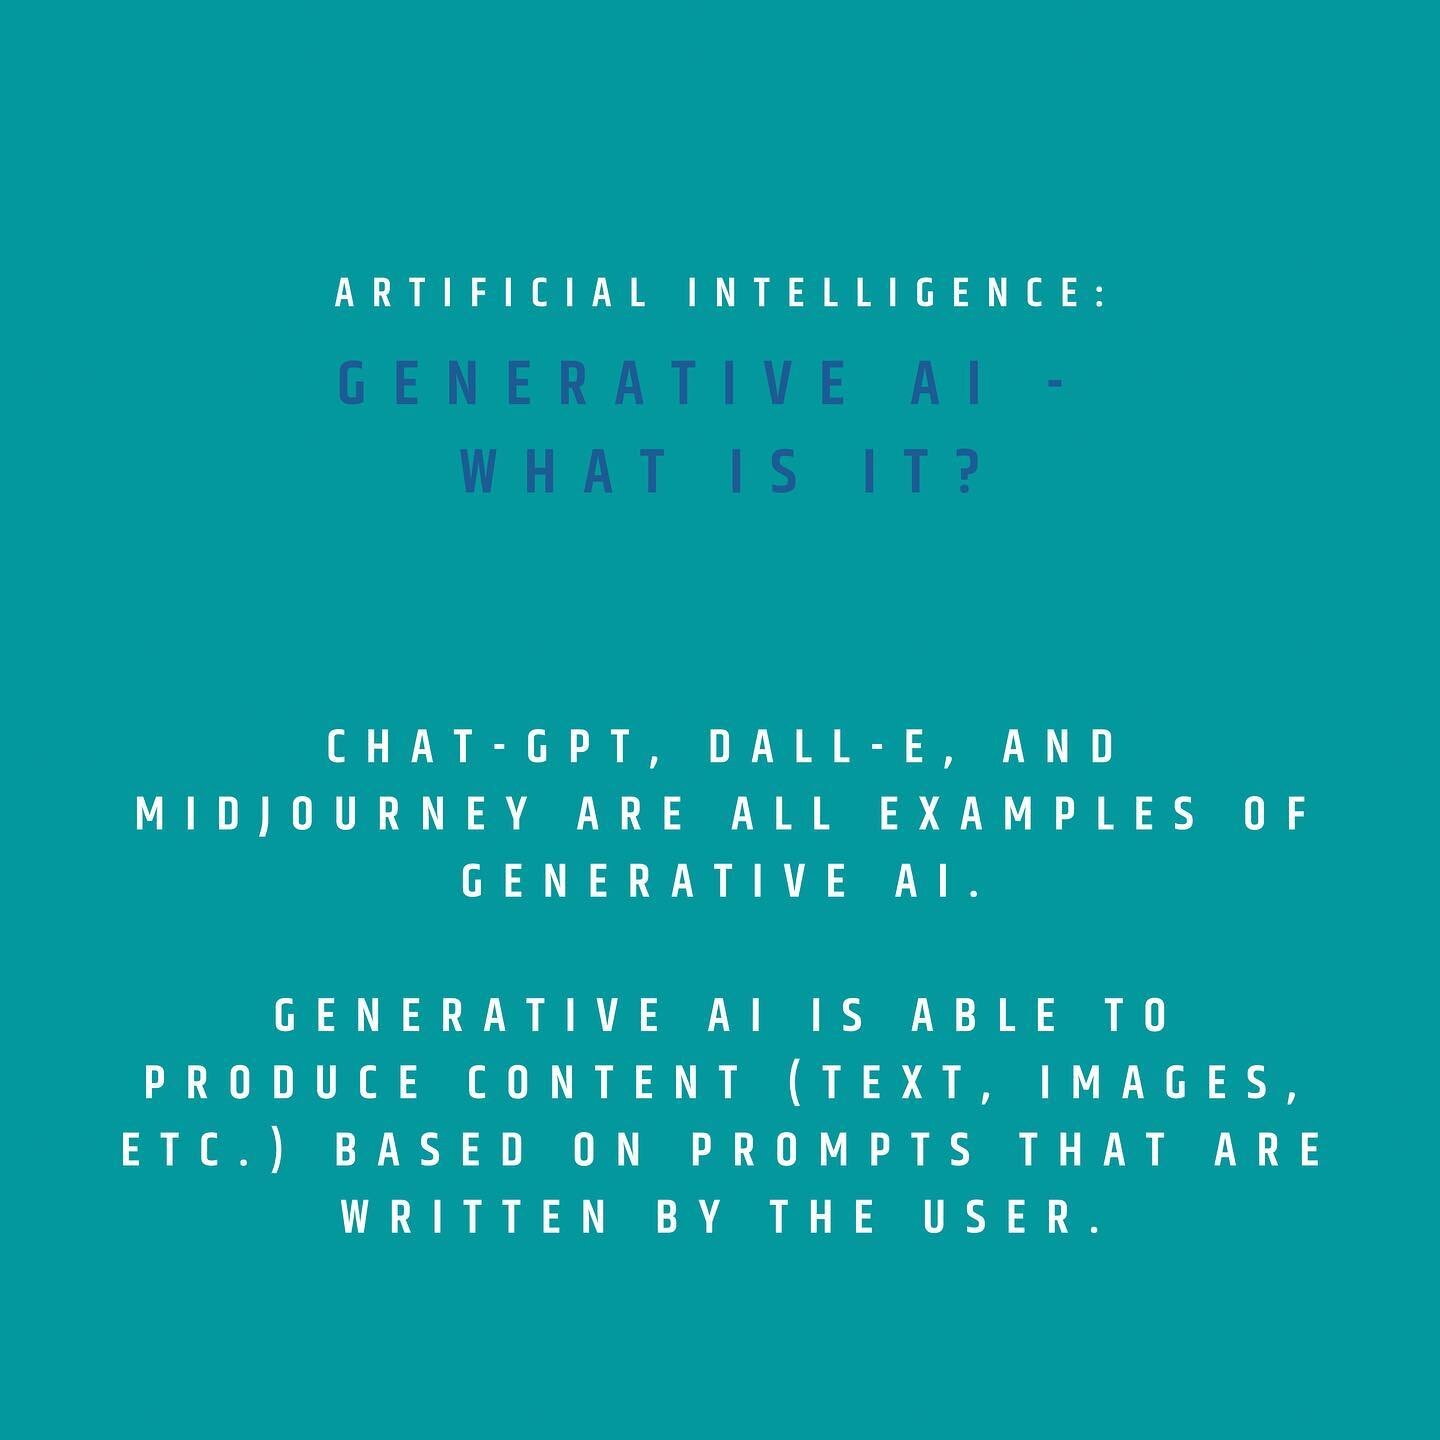 What the heck is generative AI? It&rsquo;s different than discriminative AI and it&rsquo;s what everyone has been talking about. Think Chat GPT, Midjourney, etc. 

These tools can complement our work and help our lives in amazing ways&hellip; but the